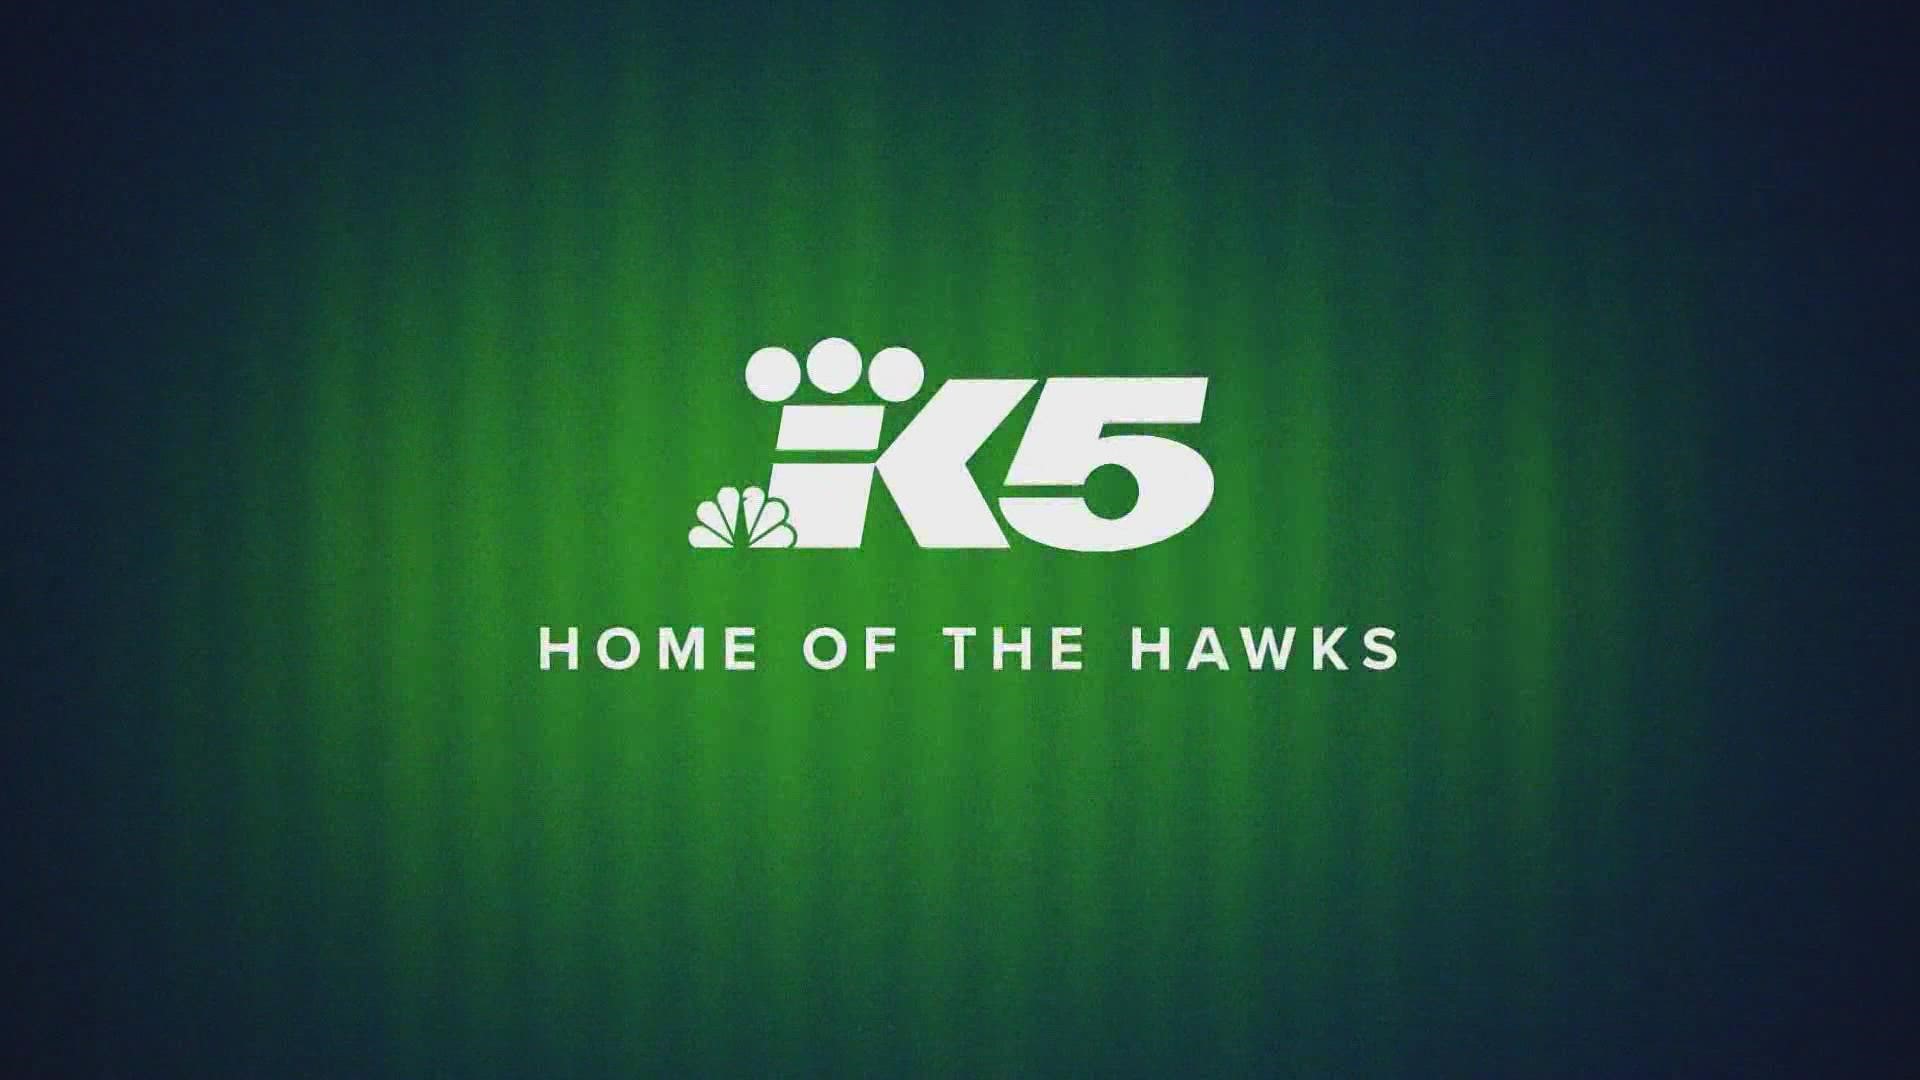 The Home Team is now the exclusive home of the Seattle Seahawks